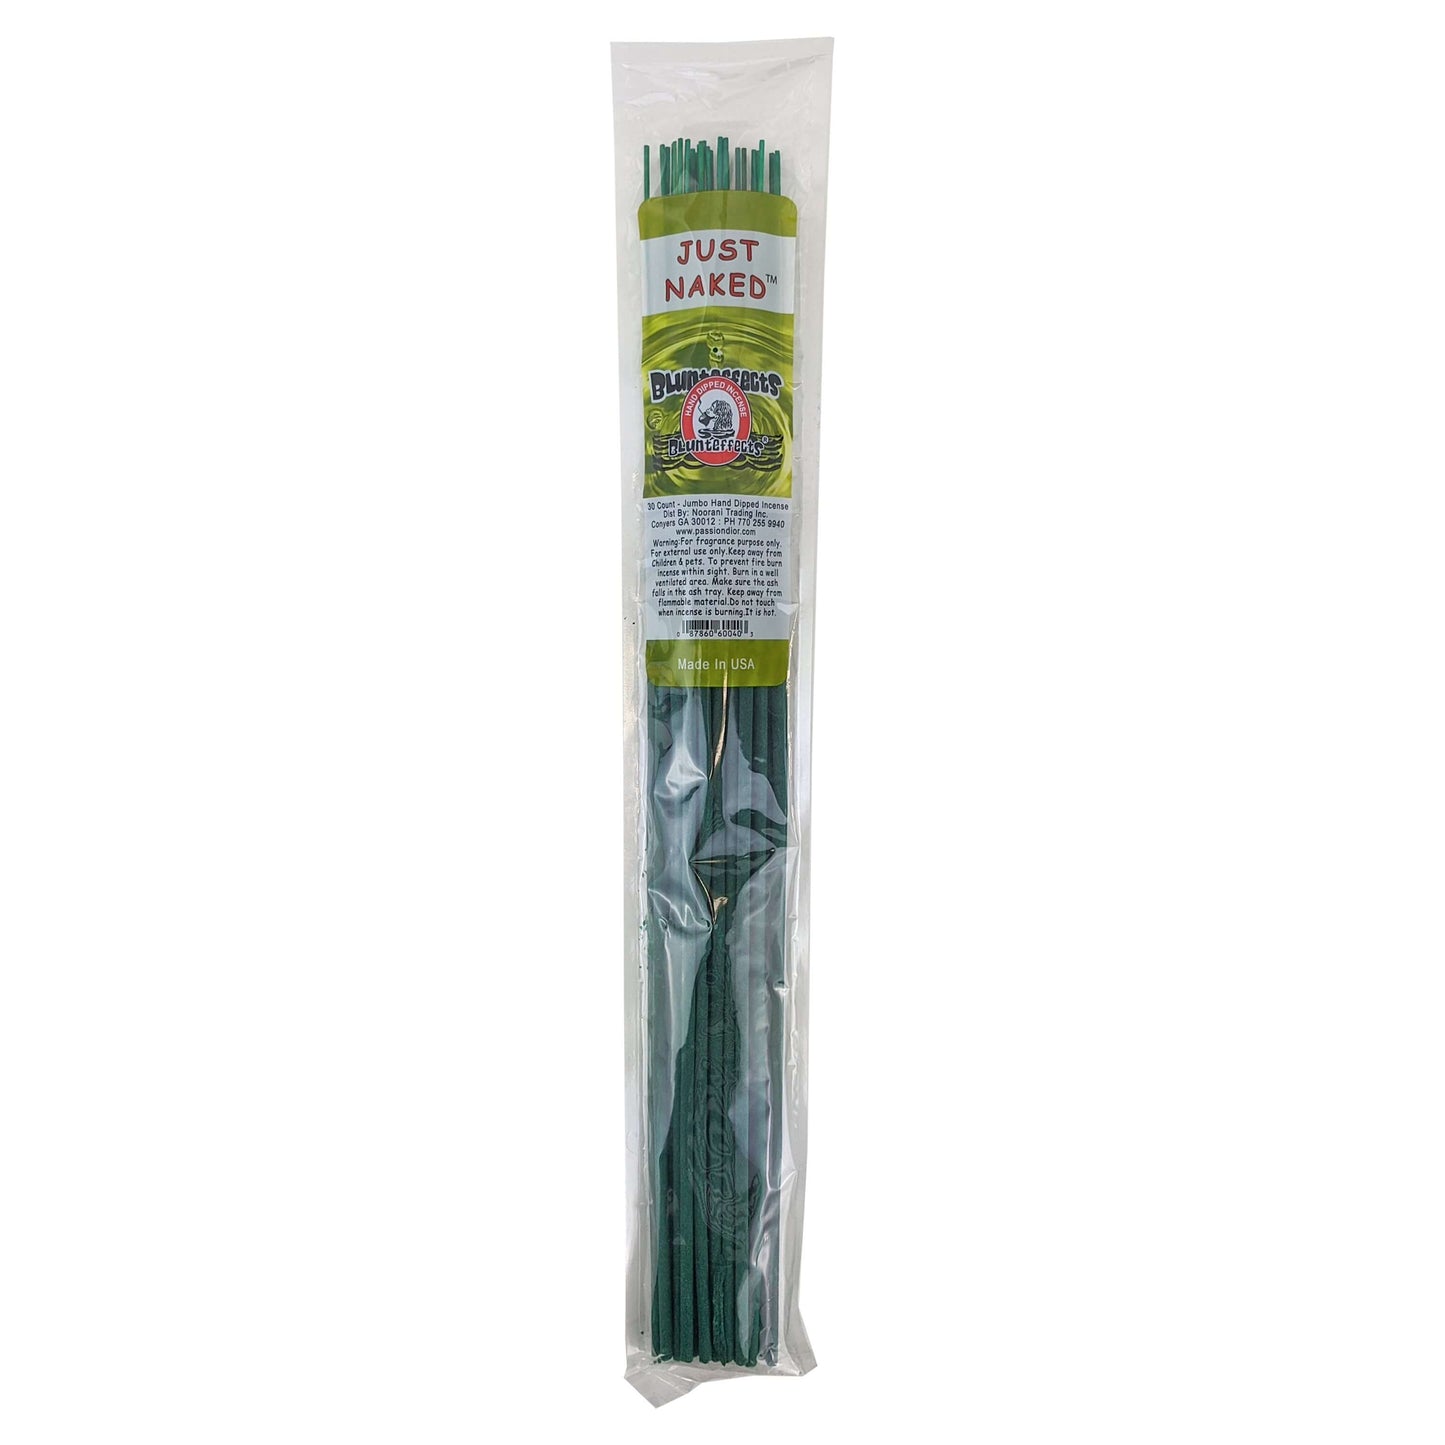 Blunteffects Jumbo Incense Just Naked 2